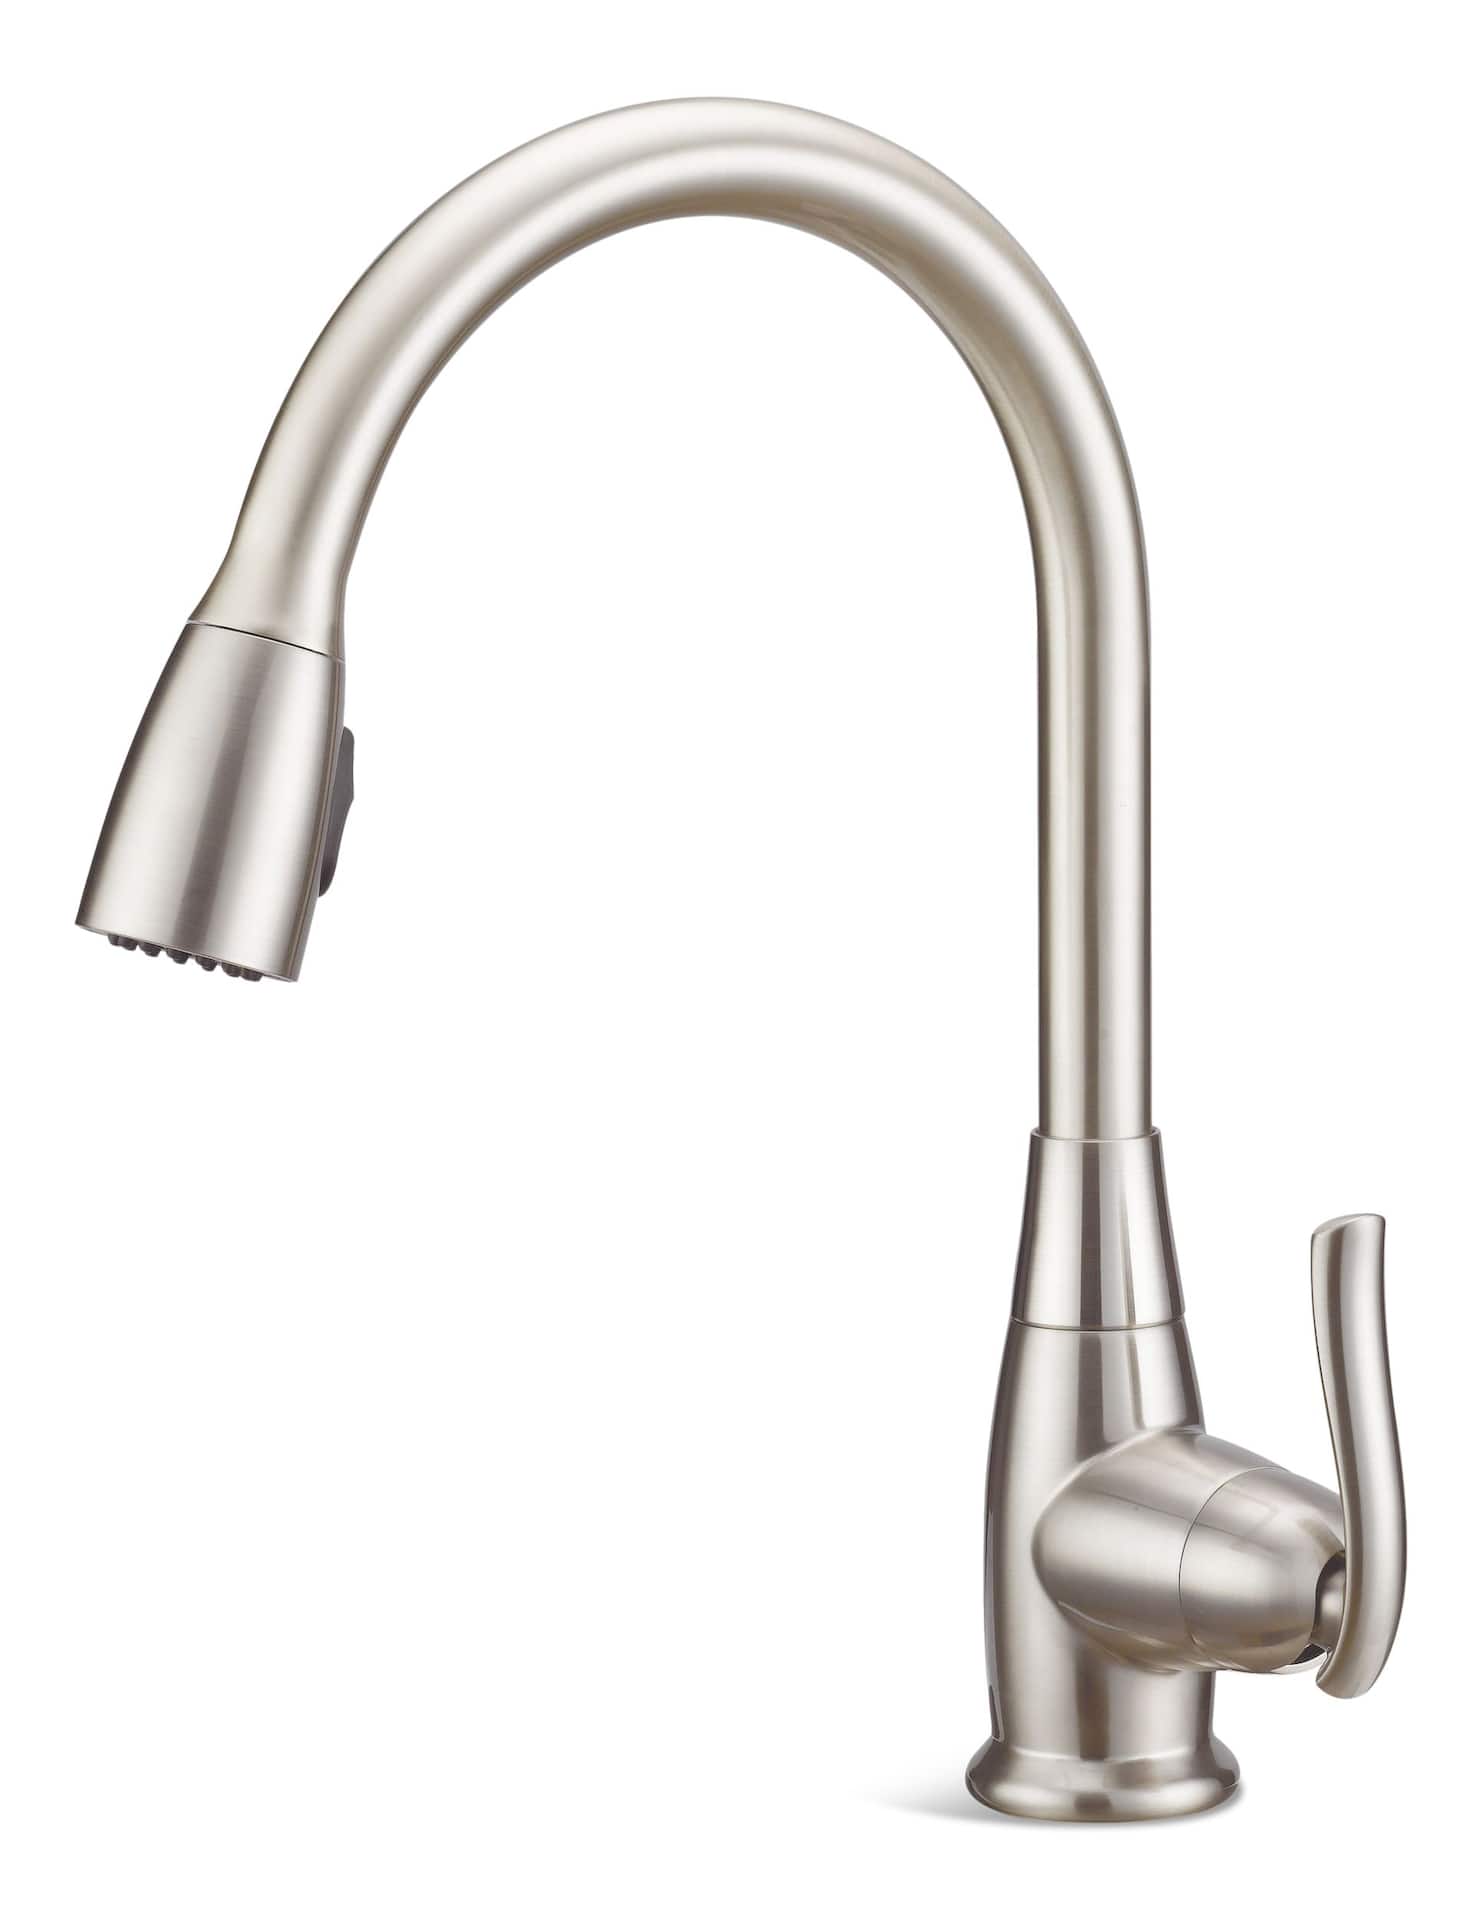 Danze Terrazoa Pull Down Kitchen Faucet Brushed Nickel 4a02a7d2 60f4 4633 9dbe Af70ab1144f5 Jpgrendition 